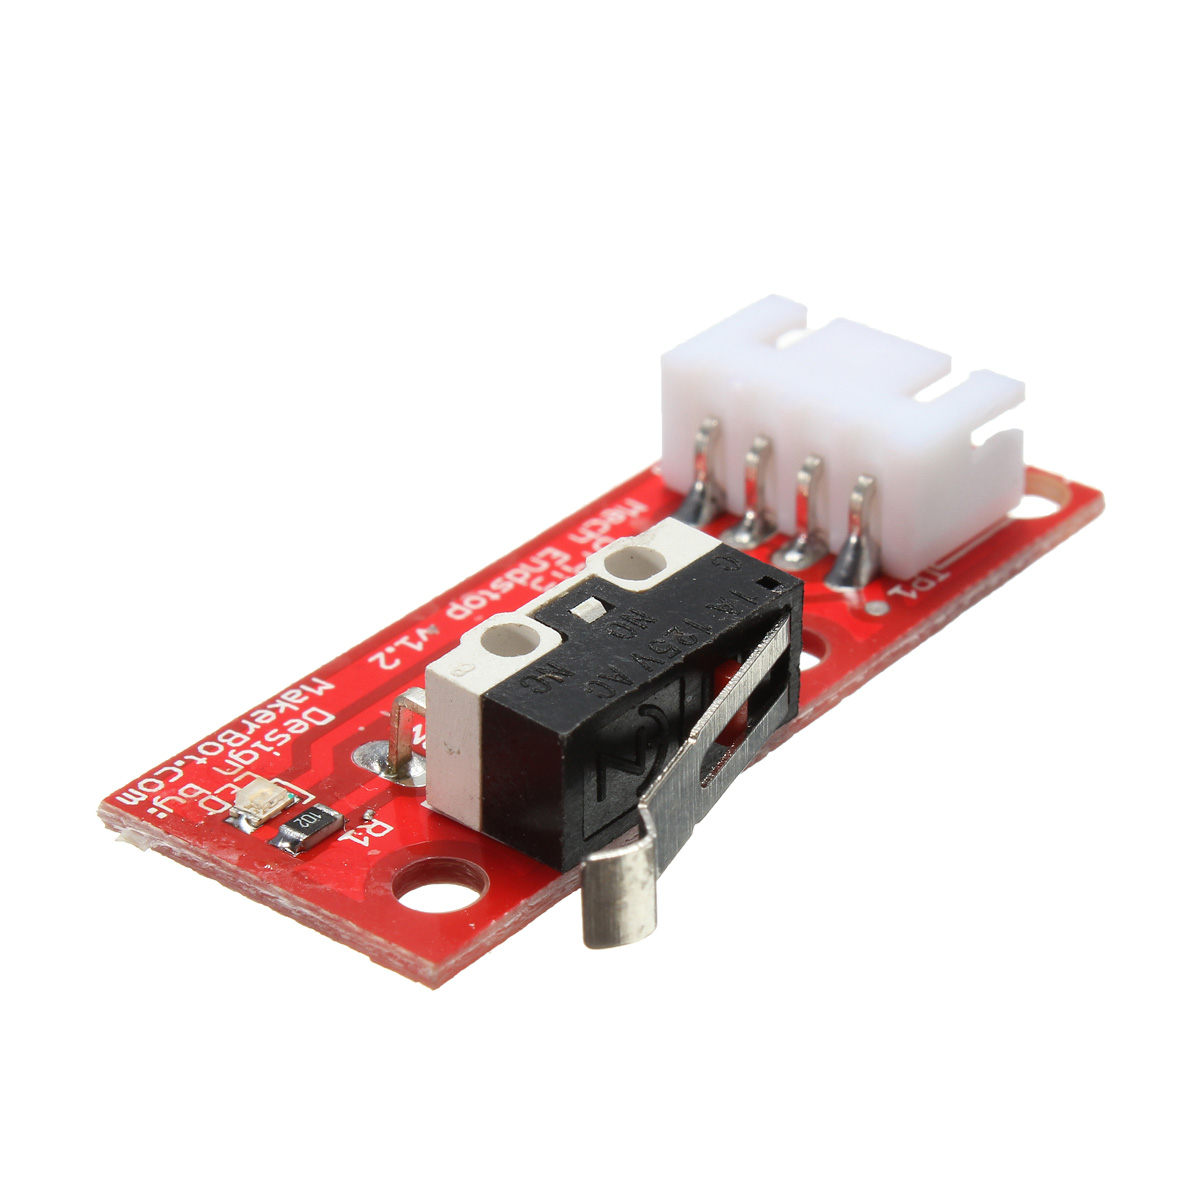 RAMPS 1.4 Endstop Switch For RepRap Mendel 3D Printer With 70cm Cable 9